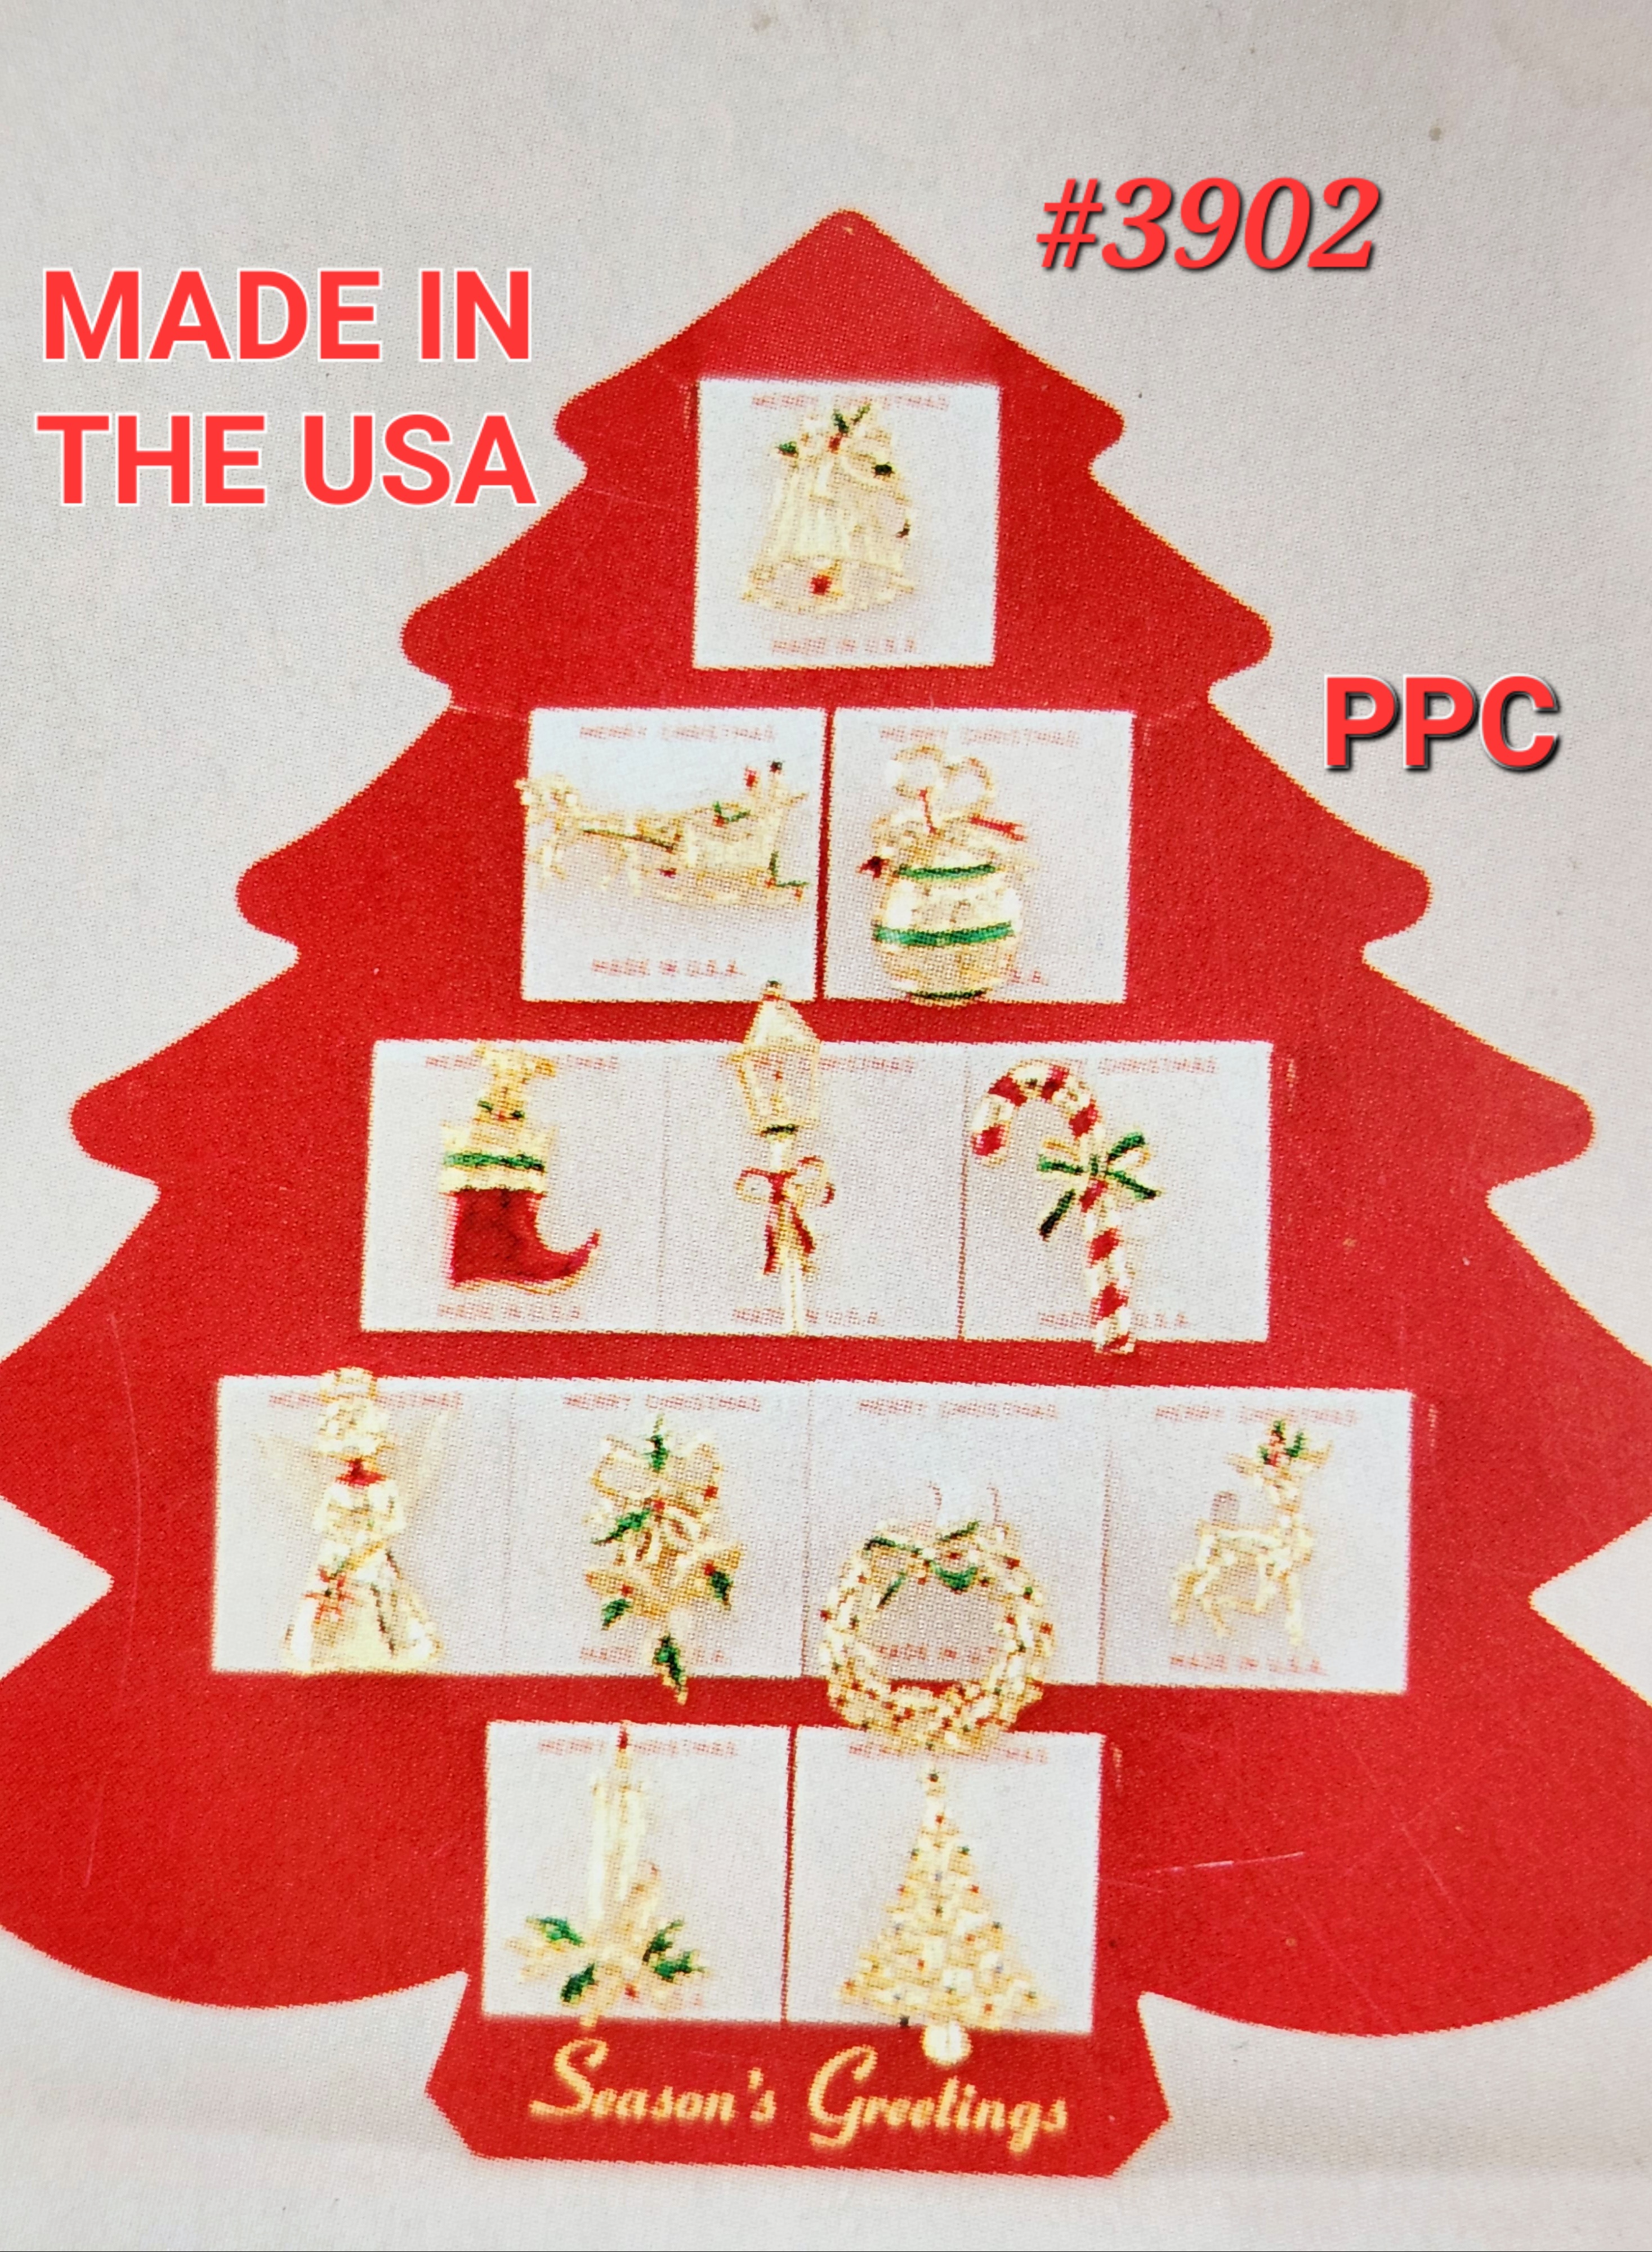 PPC CHRISTMAS and HOLIDAY. WINTER #3902 PINS. MADE IN THE USA QUALITY 